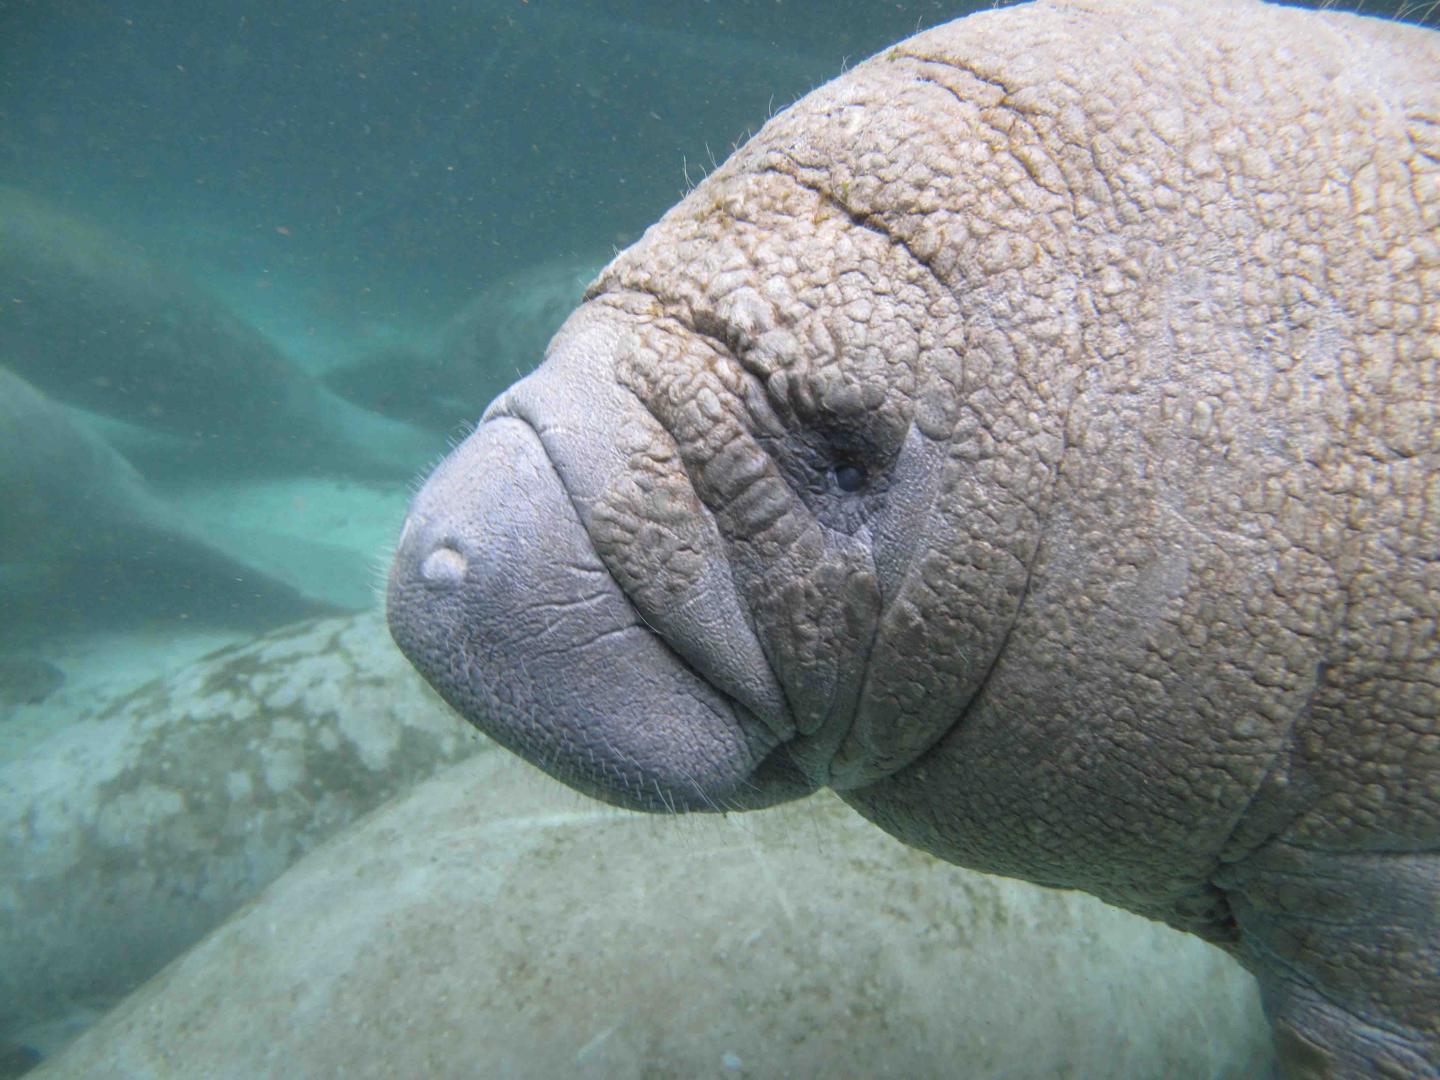 Manatee Calf is Ready for its Close-up